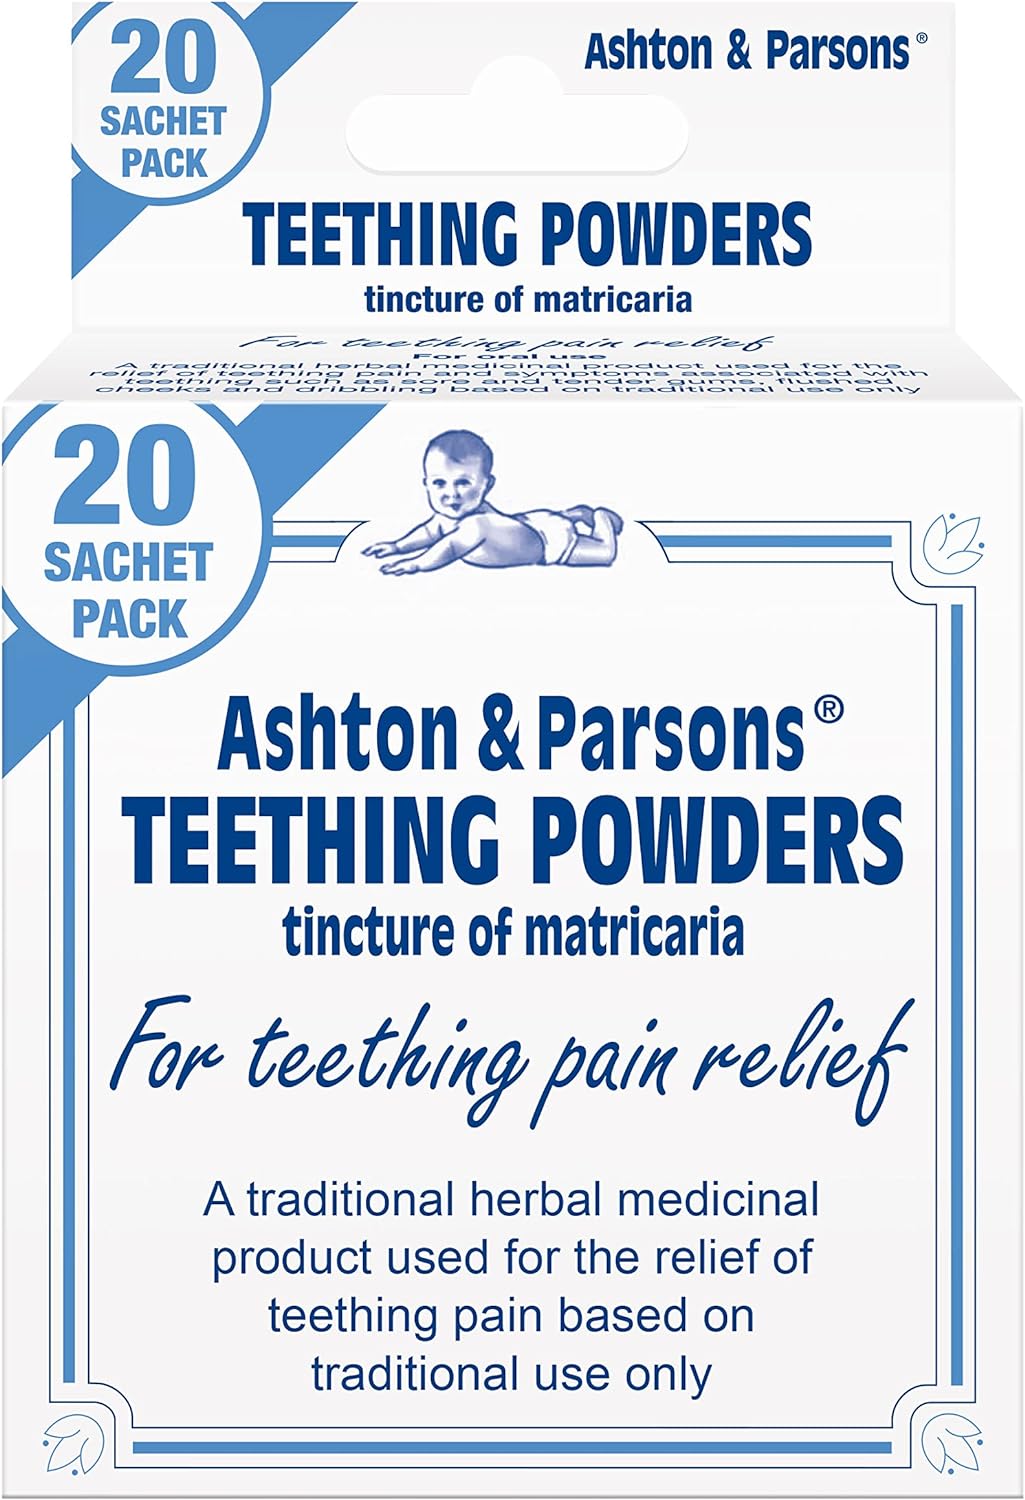 Ashton & Parsons Teething Powders for Babies From 3 Months+ Used To Help Soothe Teething Pain, Pack of 20